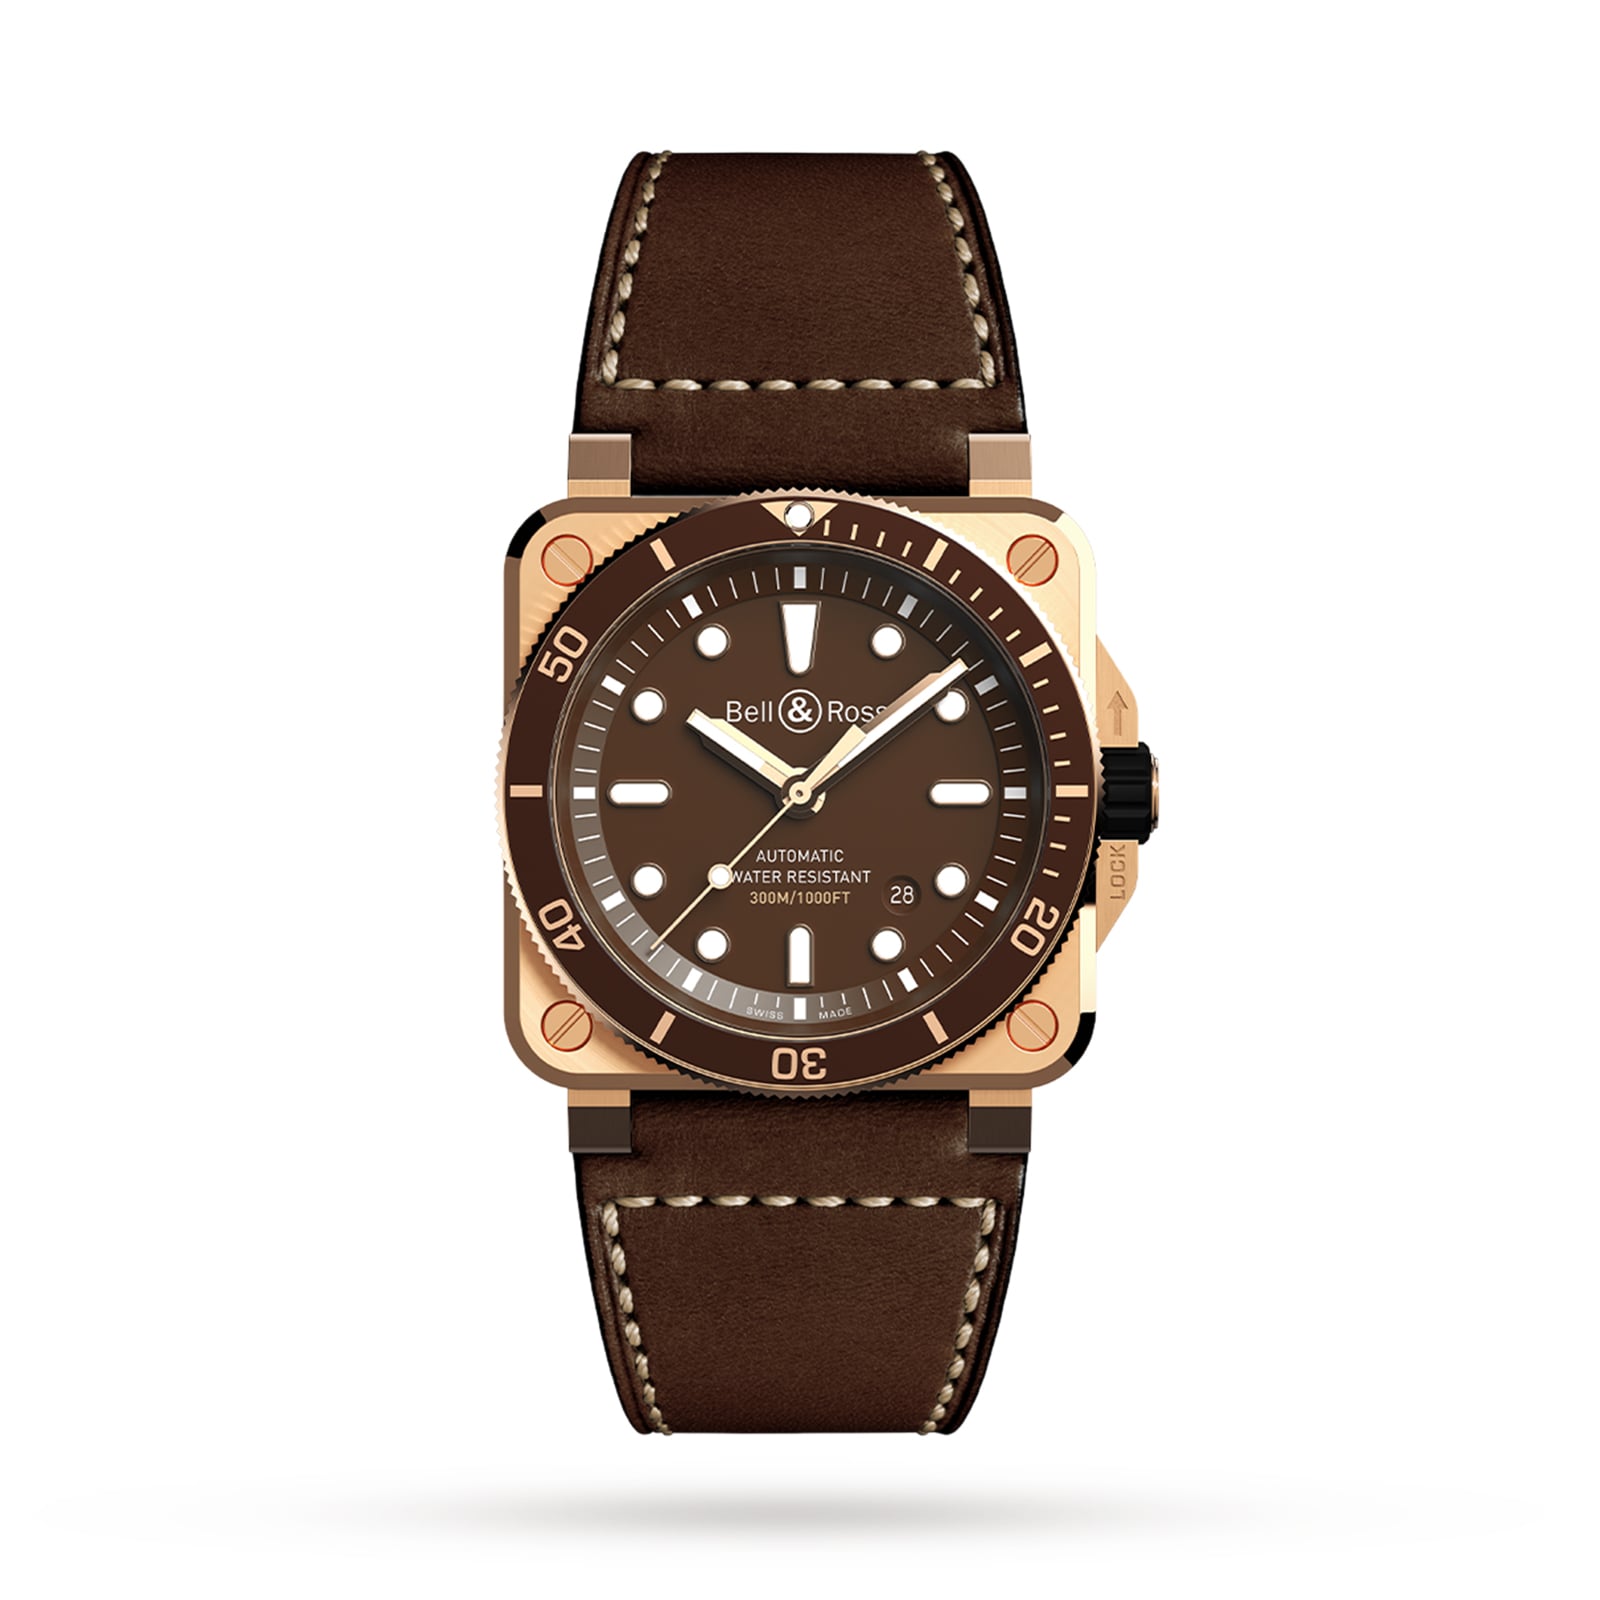 Br 03-92 Diver Brown Bronze Limited Edition 42mm